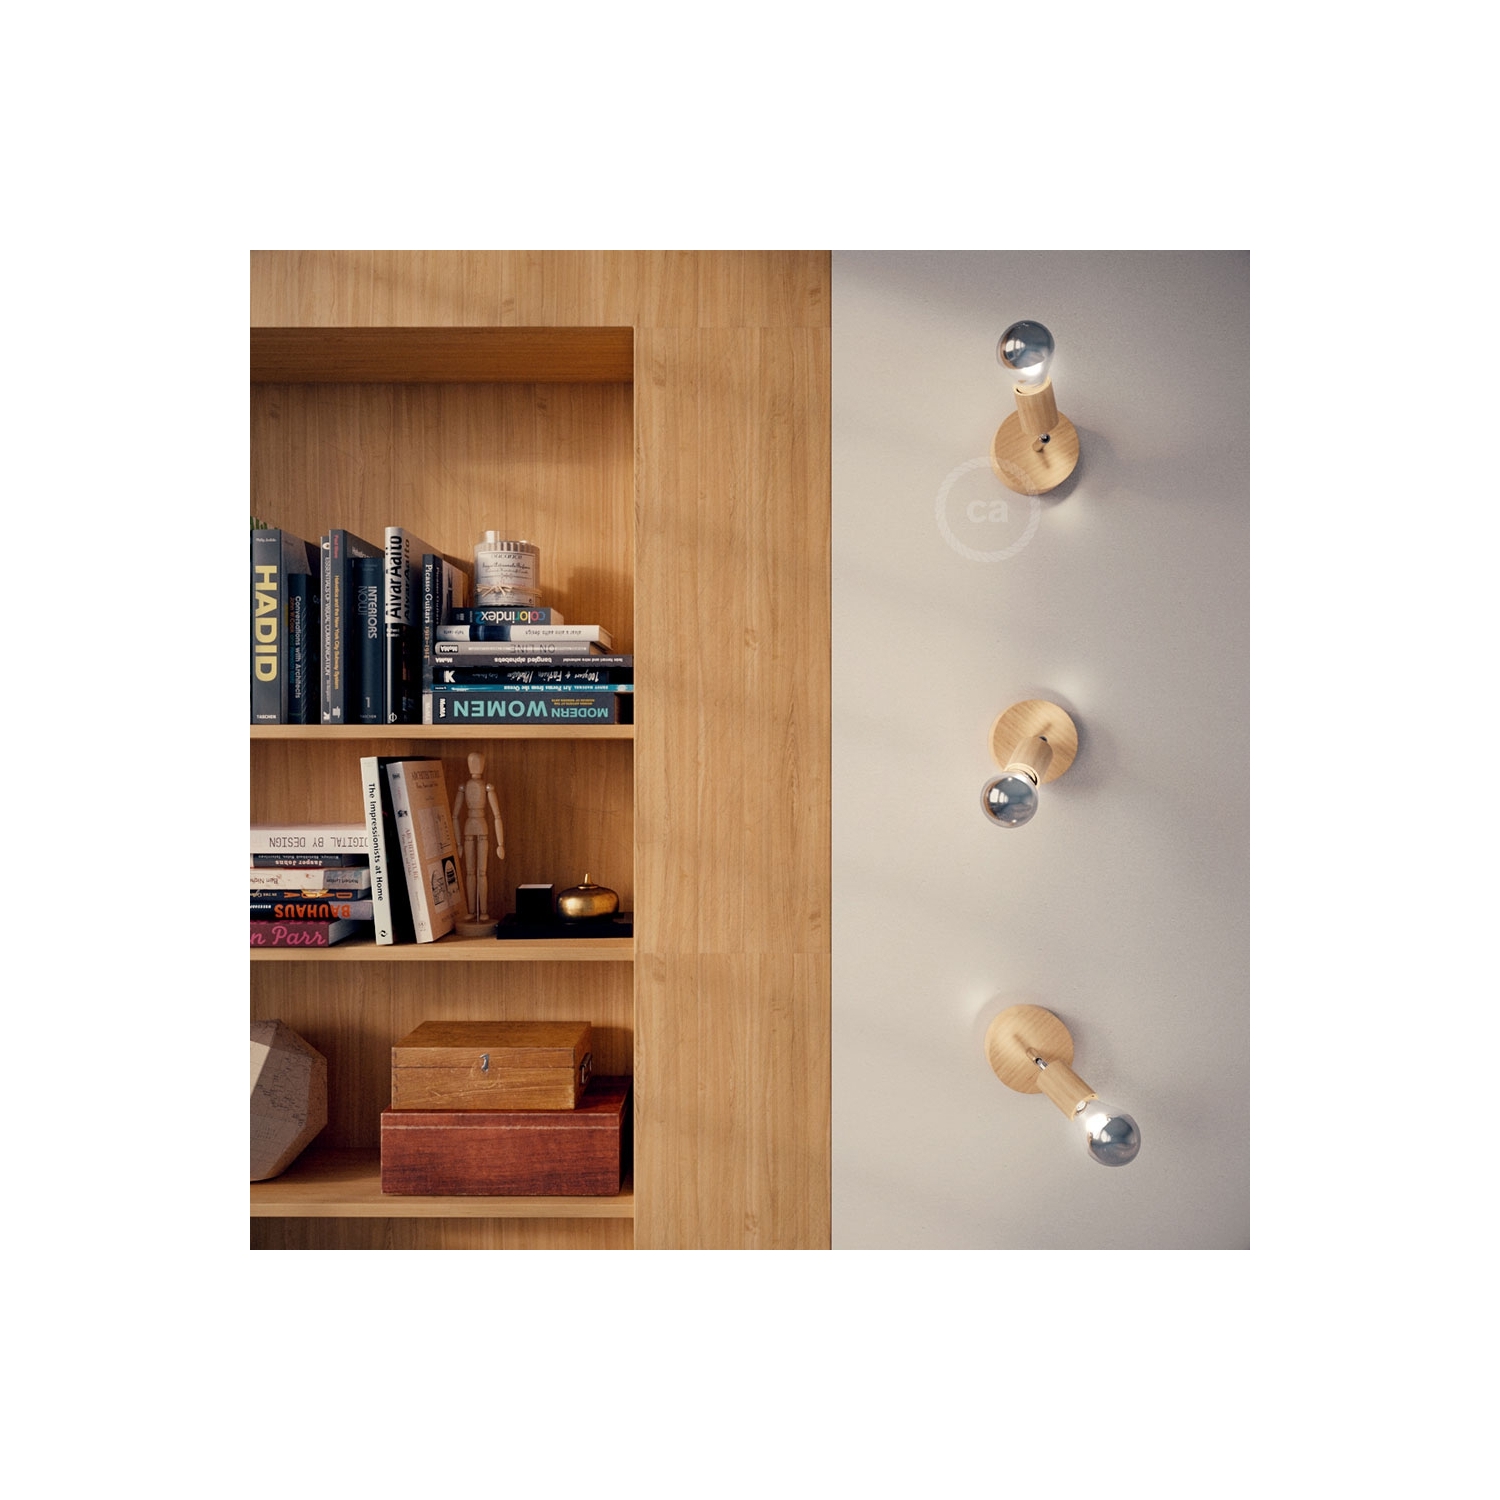 Fermaluce Natural 90°, the adjustable natural wood flush light for your wall or ceiling, 6.2".